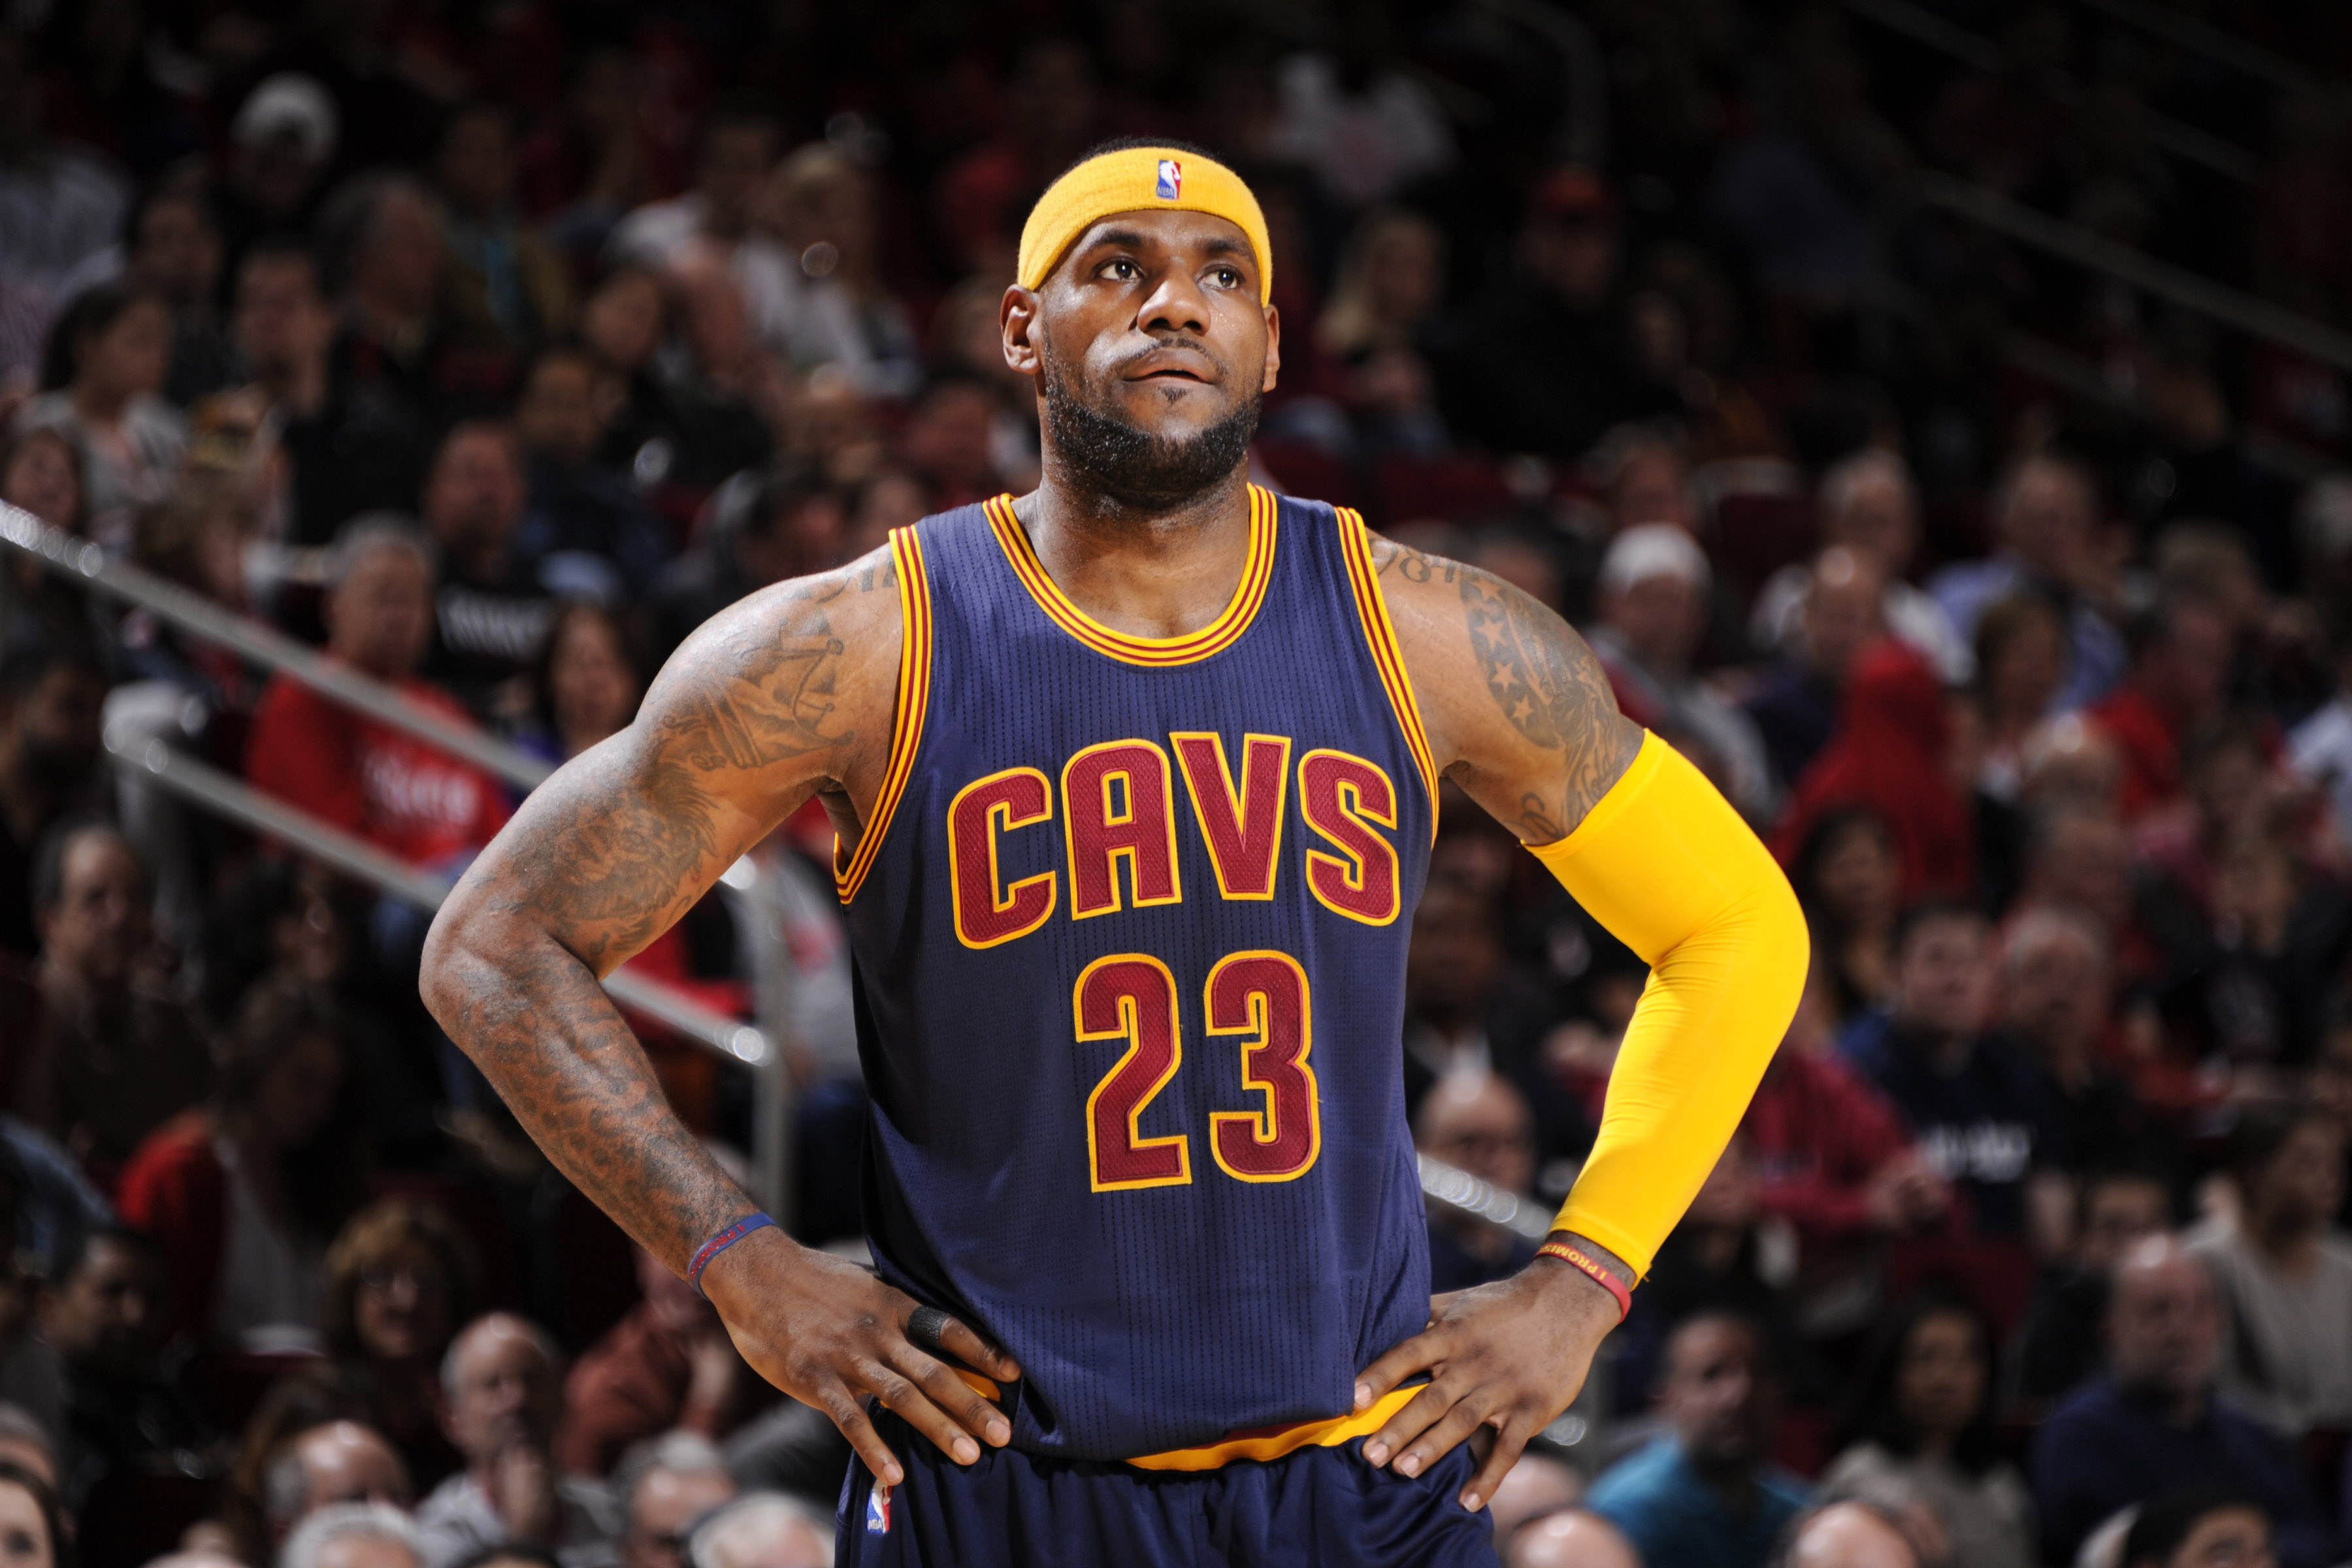 James LeBron was the reason behind the departure of many players from the team